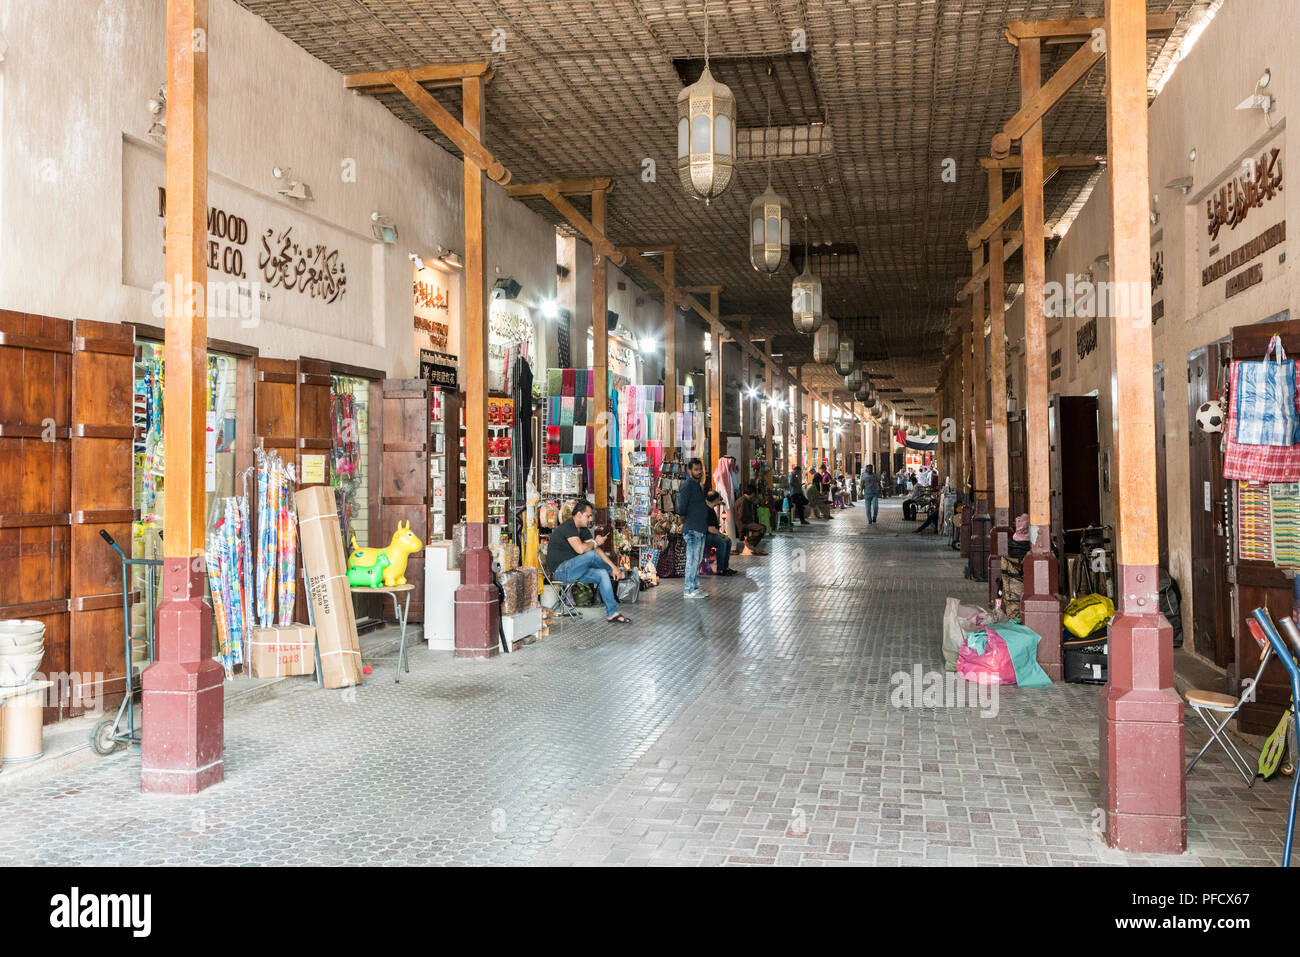 Grand Souk Deira, Dubai, UAE. This traditional market offers a variety of goods for tourists and local shoppers Stock Photo